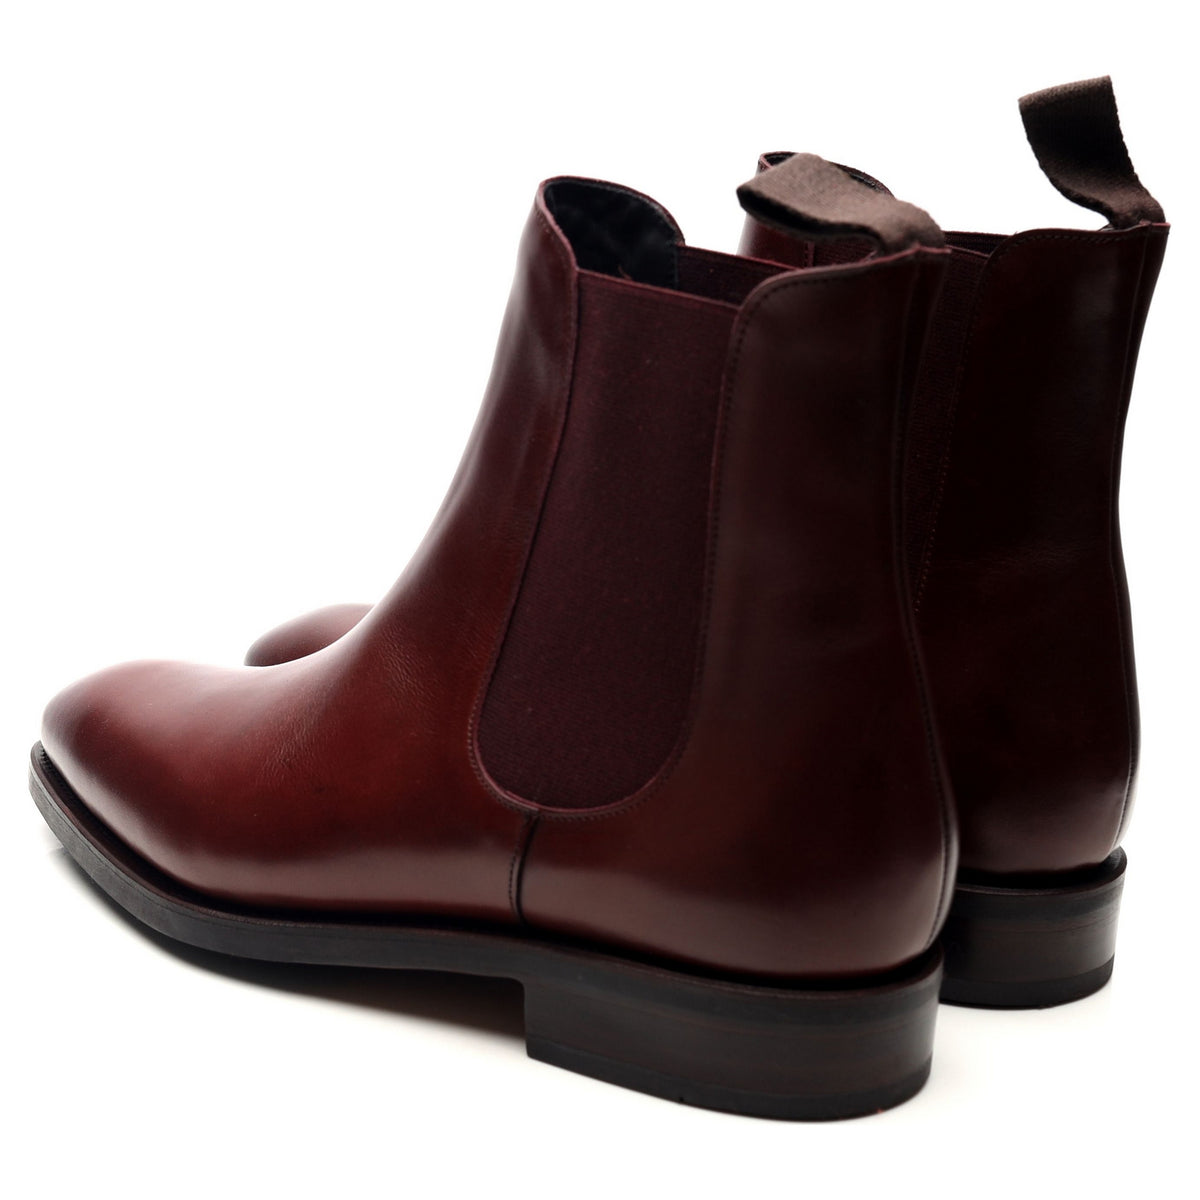 &#39;80216&#39; Burgundy Leather Shearling Chelsea Boots UK 6 EE